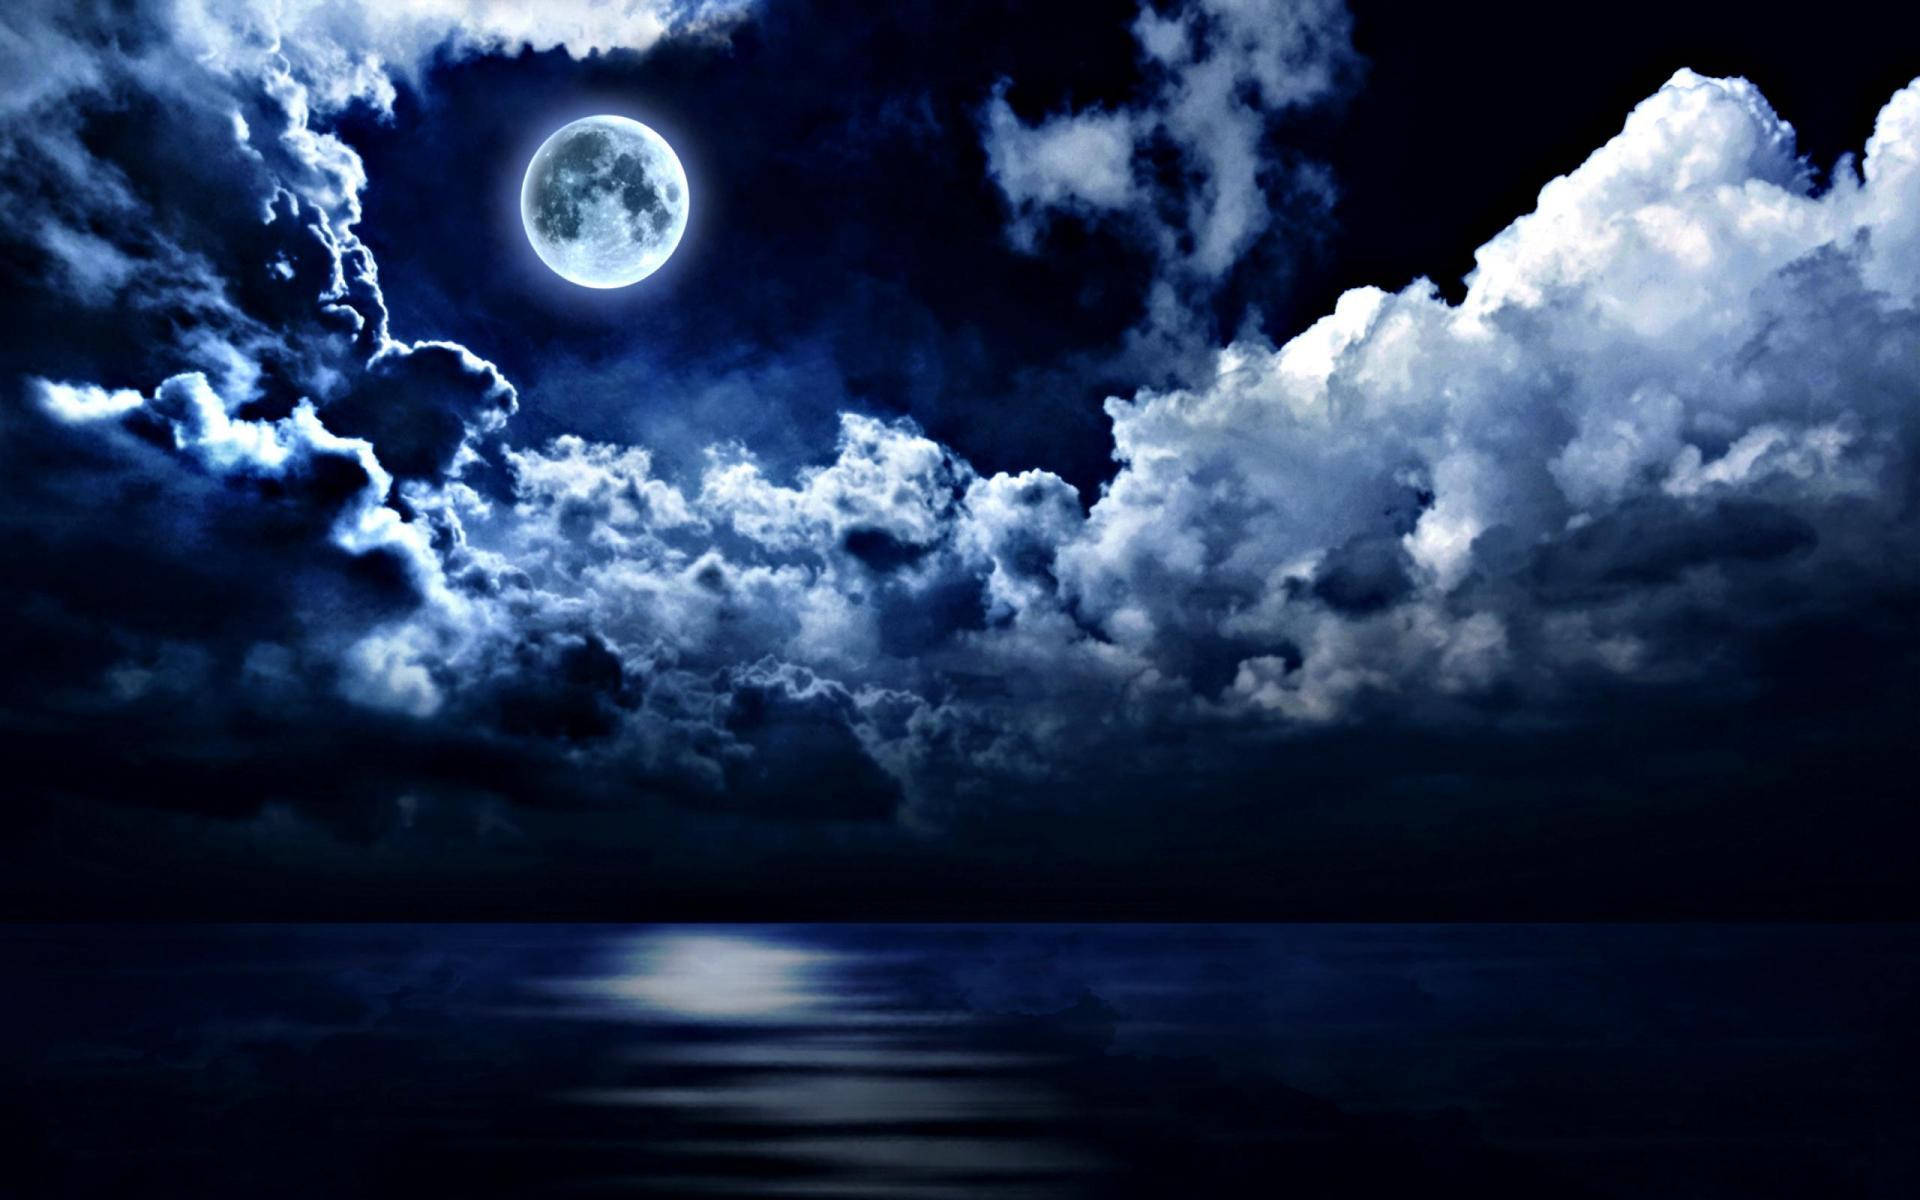 Free Night Wallpaper Downloads, [600+] Night Wallpapers for FREE |  